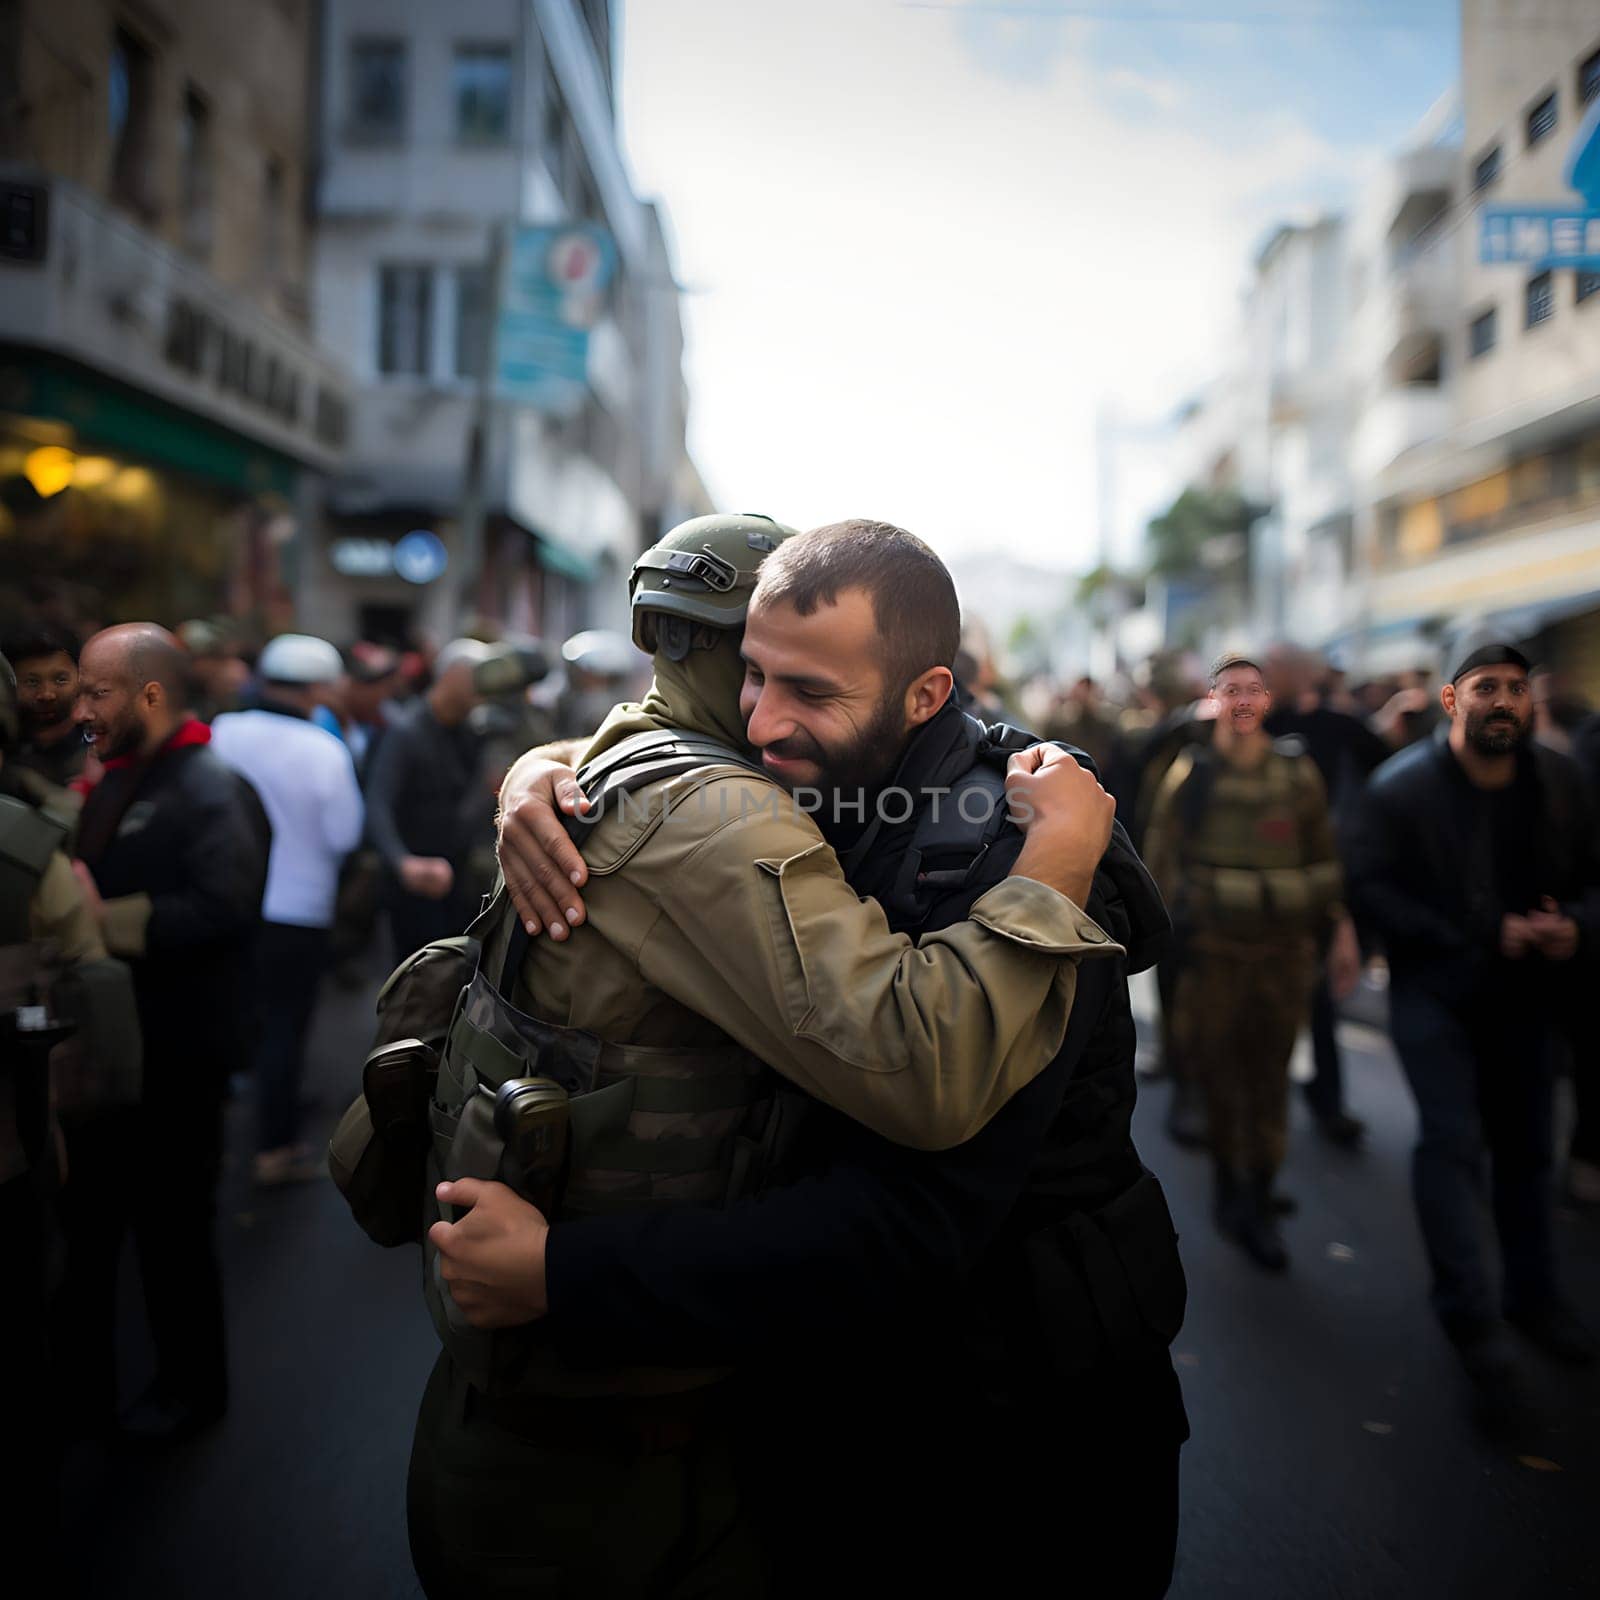 A man from Israel hugging a friend from Palestine after the end of a war conflict by Raulmartin